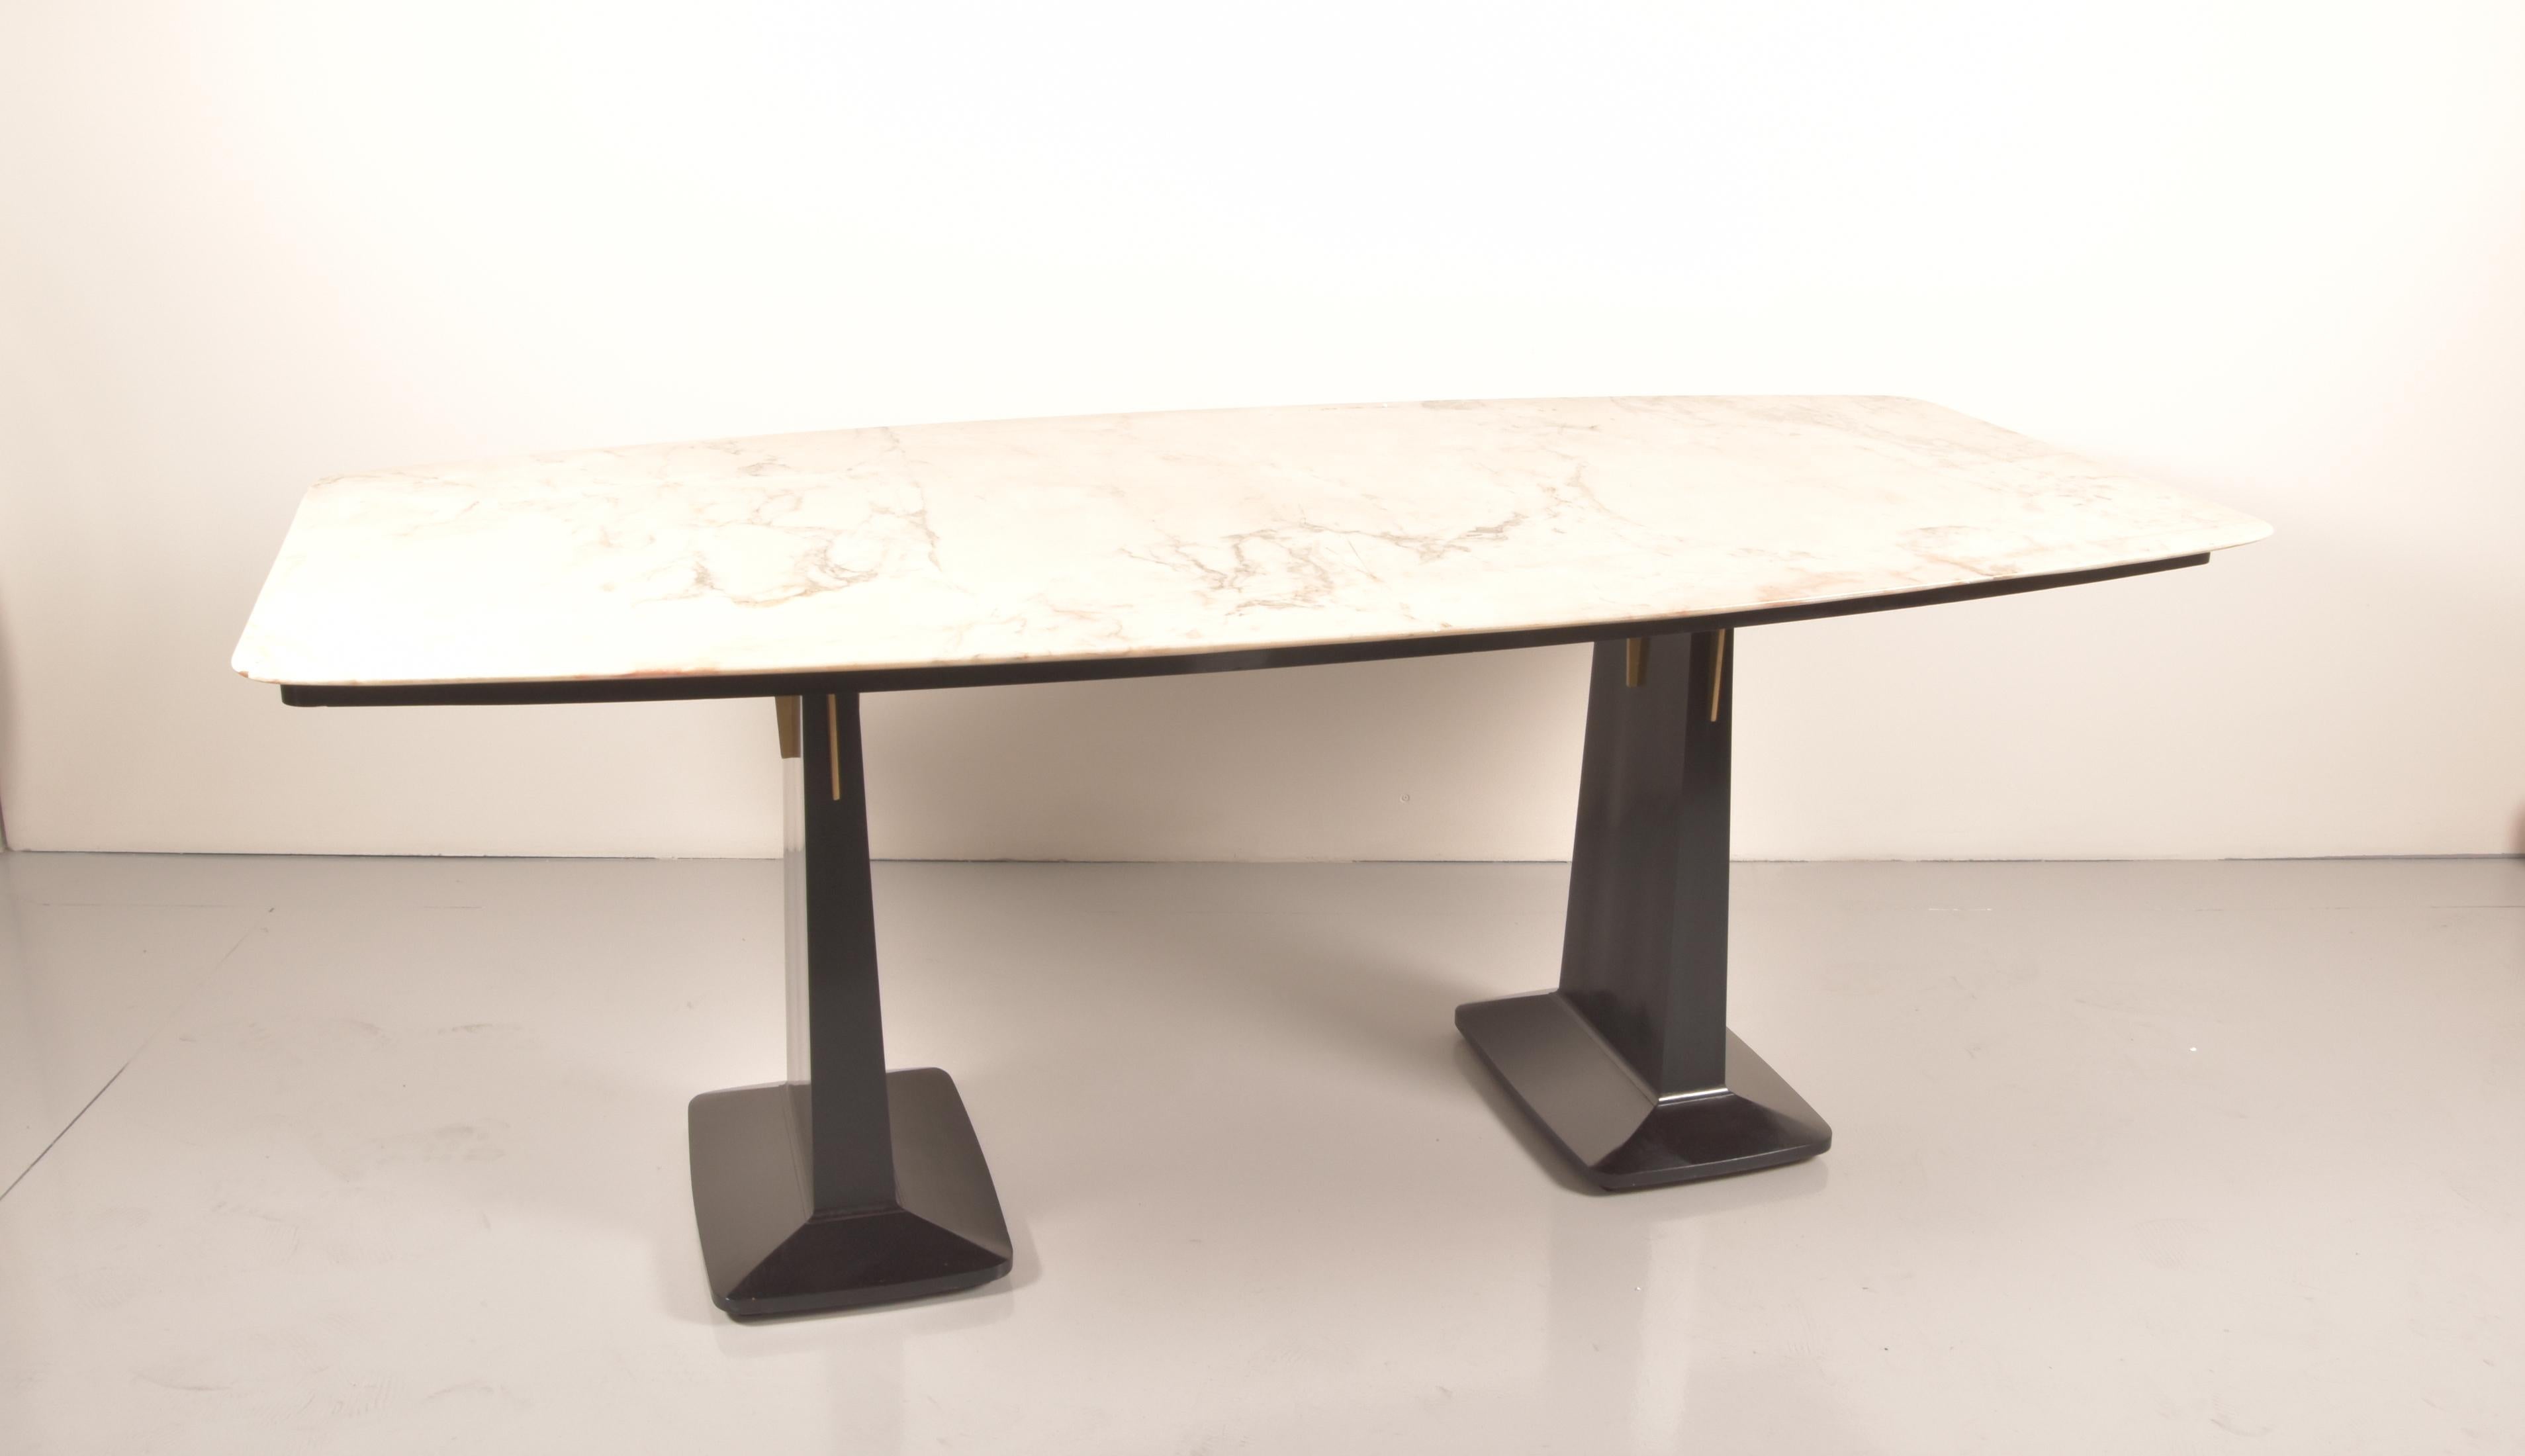 A beautifully ebonized mahogany and rose marble dining table by Arredamenti Borsani Varedo,whit original label, Italy, circa 1950. The wonderful curvature and elegant lines of this table. Comfortably accommodating eight persons, this table really is